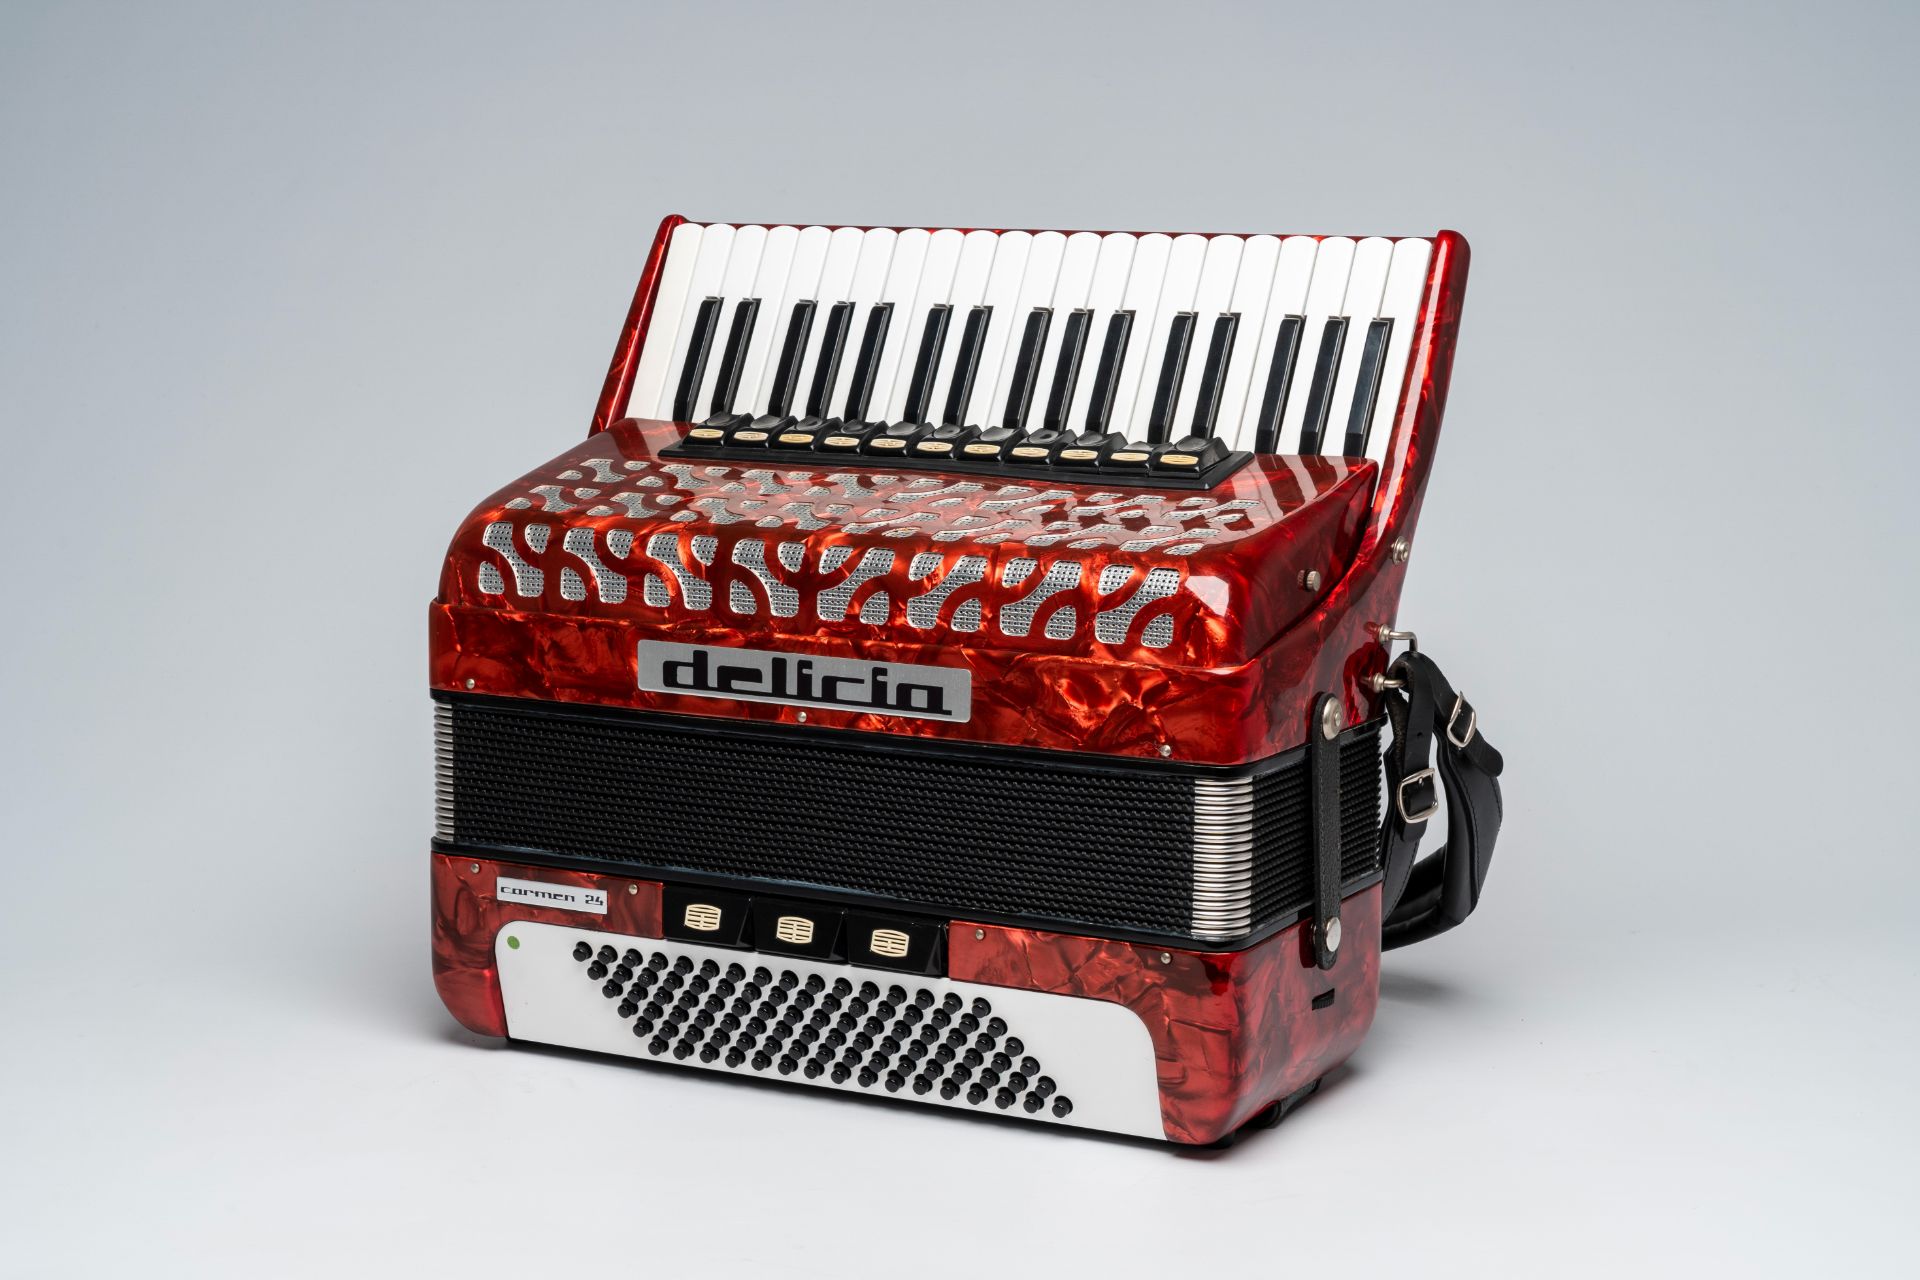 A Czech 'Delicia' chromatic accordion with piano keyboard and box, ca. 1990 - Image 2 of 6